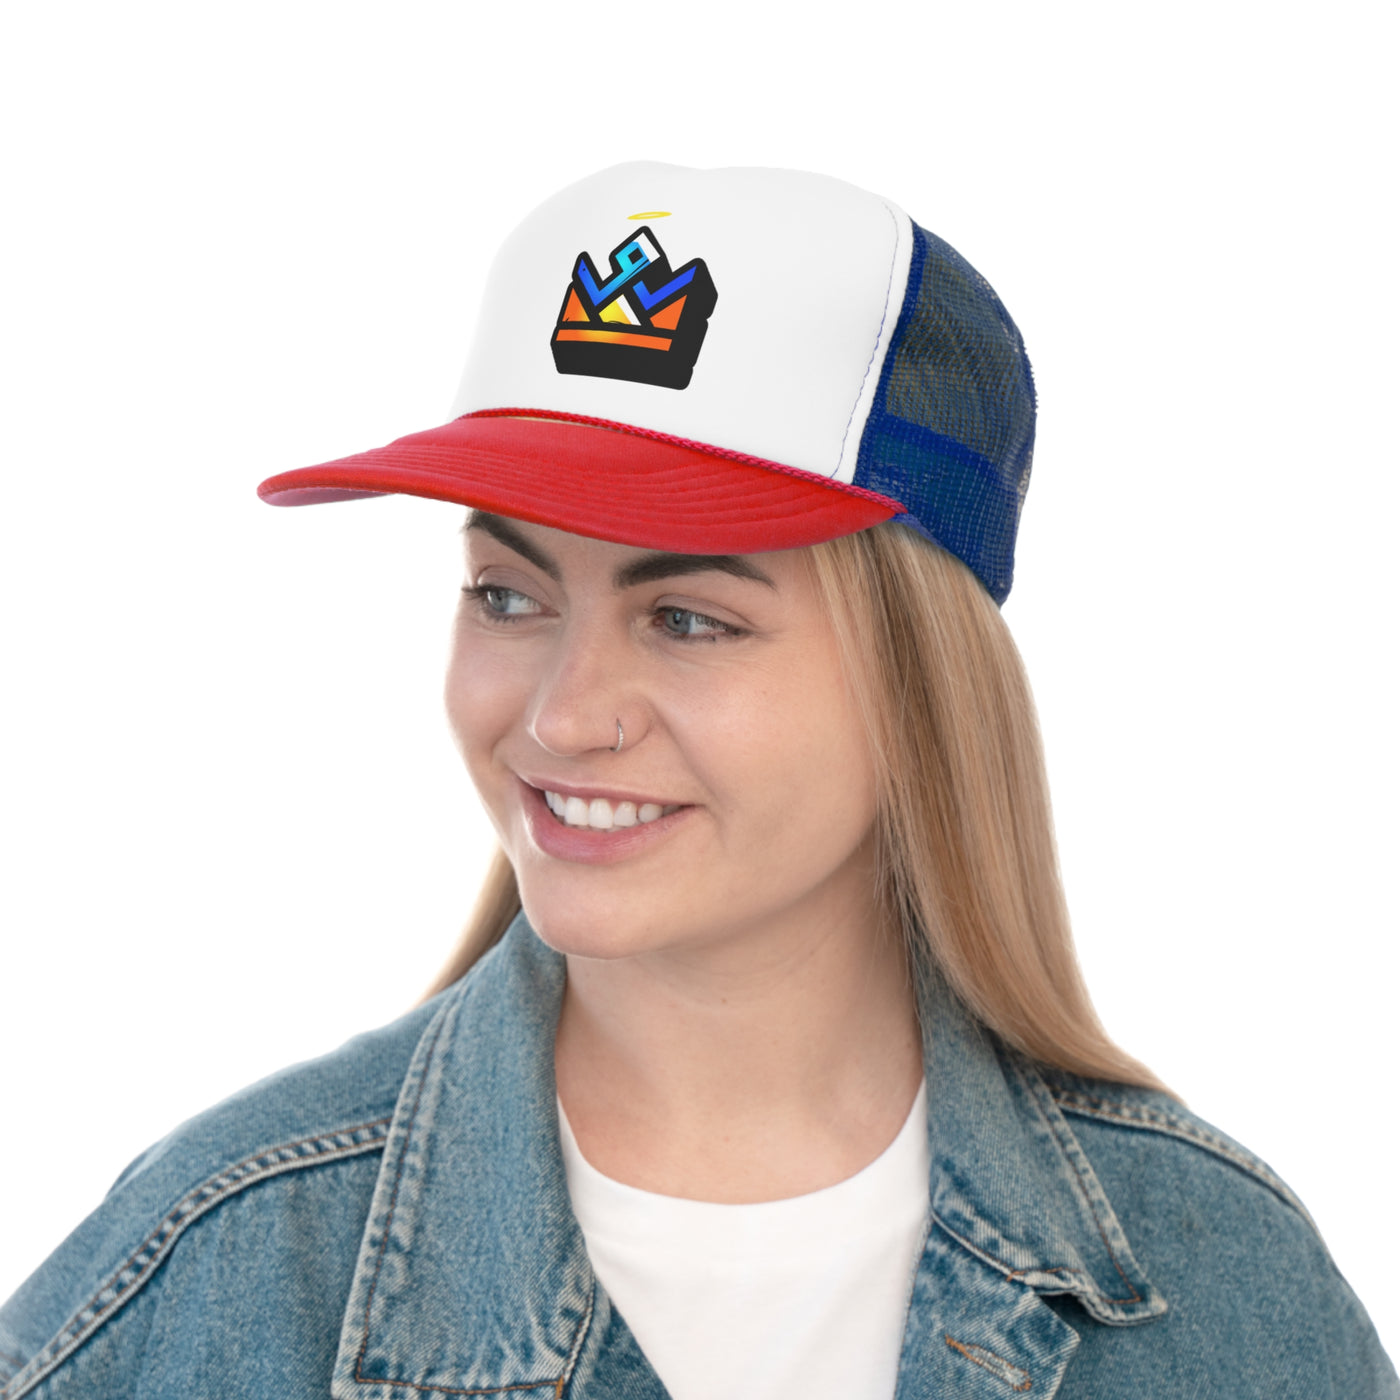 Colorful Crown Trucker Snapback (4Colors)